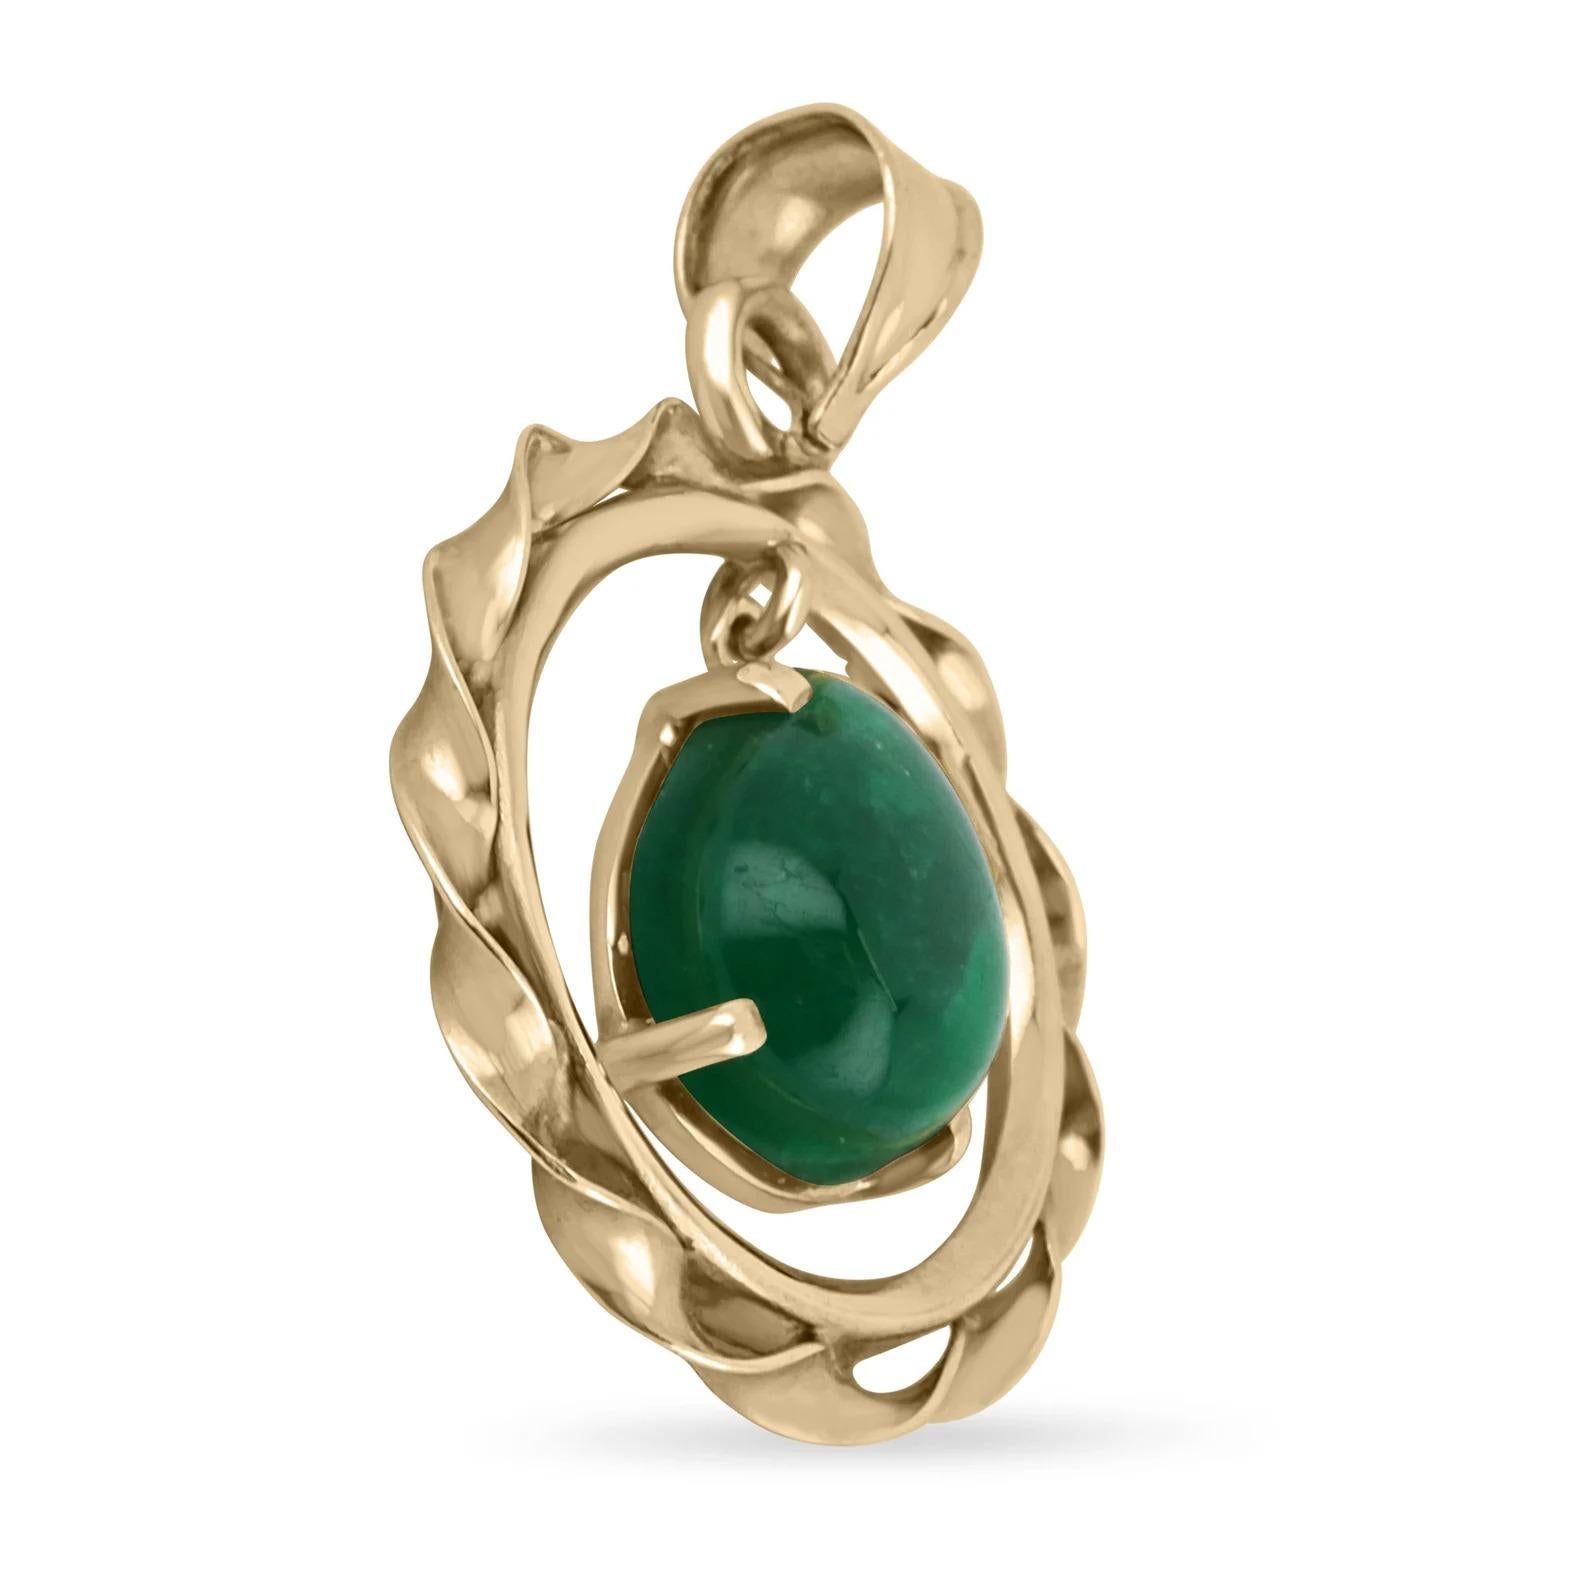 Featured here is a vintage, Colombian emerald pendant. An alluring emerald cabochon is the star center for this piece. The bright, earth-mined emerald is set in a filigree 14K yellow gold medallion-like pendant. Set with a genuine rich emerald from